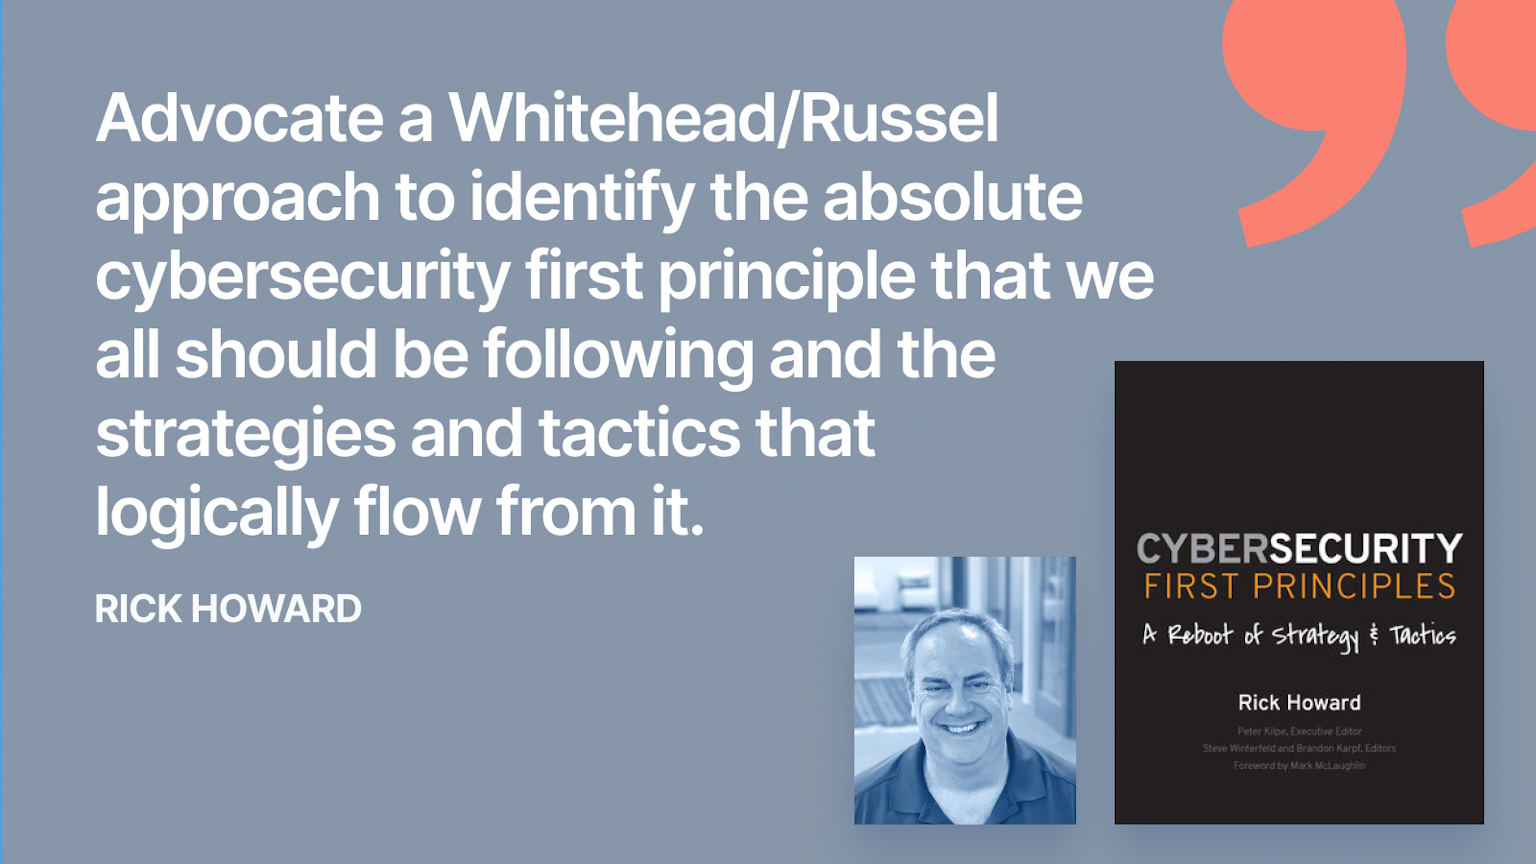 Rick Howard's Cybersecurity first principles book